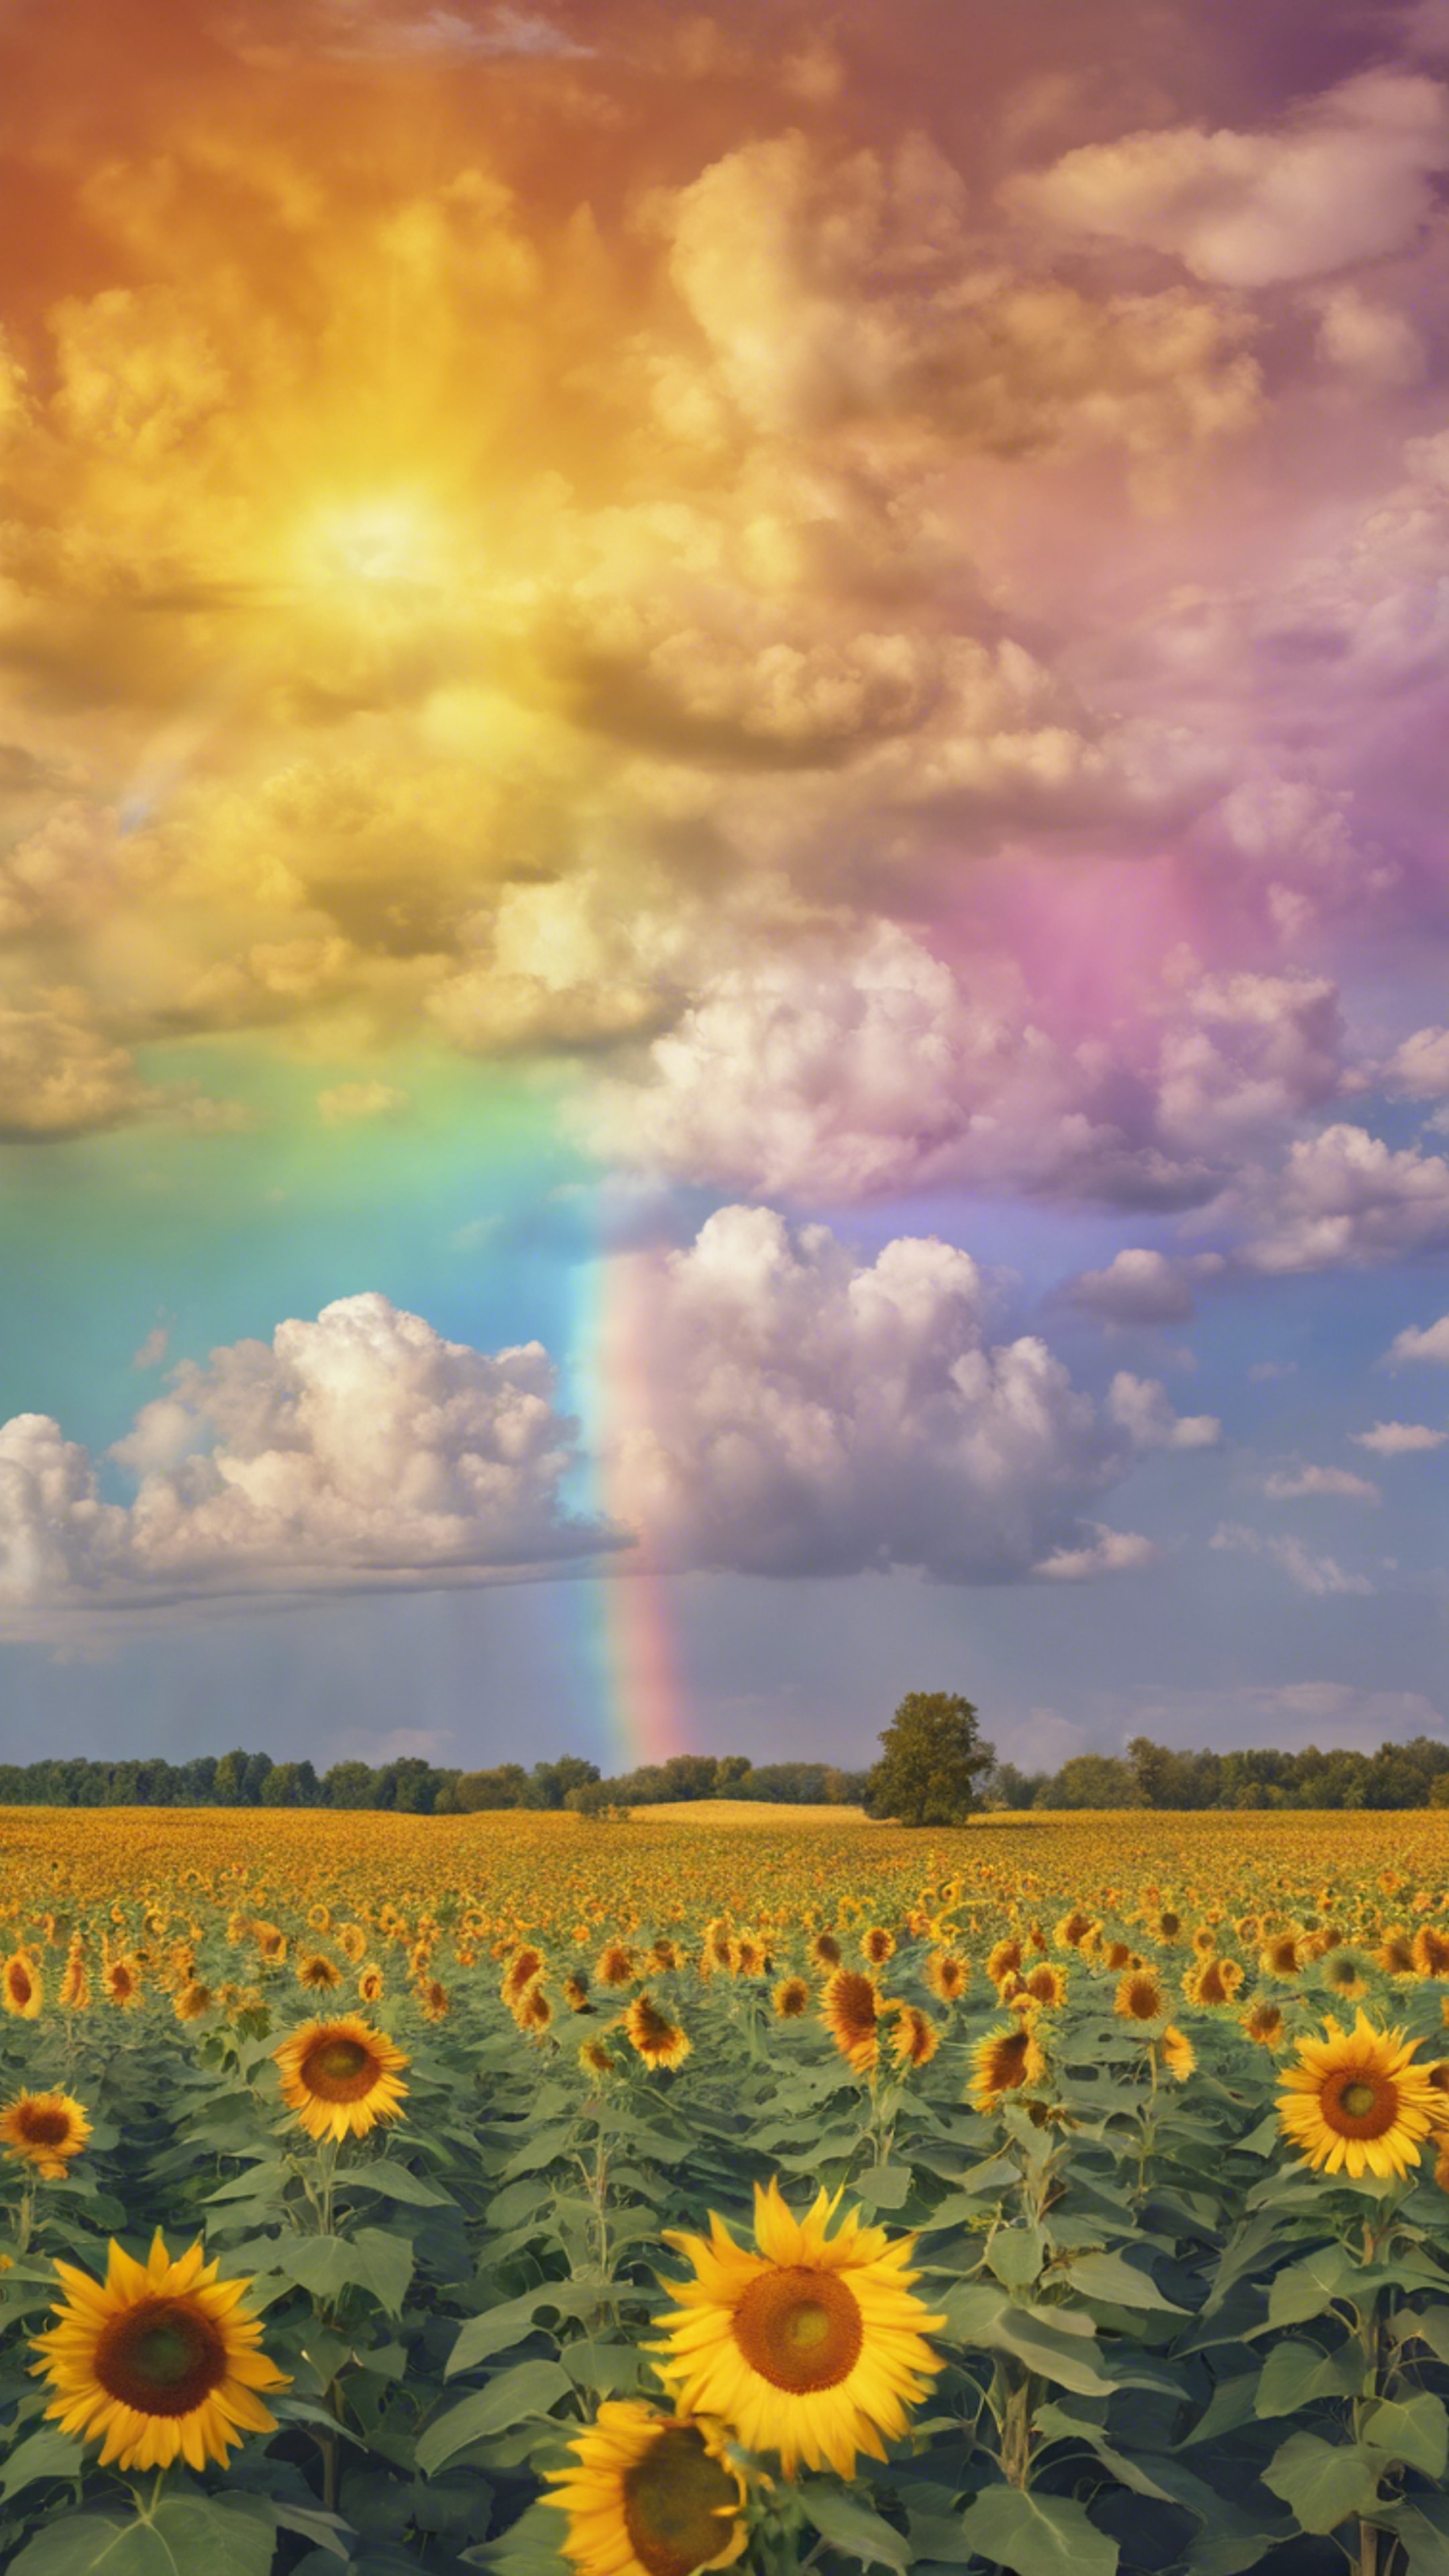 A rainbow painting the sky above a field filled with blooming sunflowers.壁紙[e6220dfb5e5d40d4aebc]